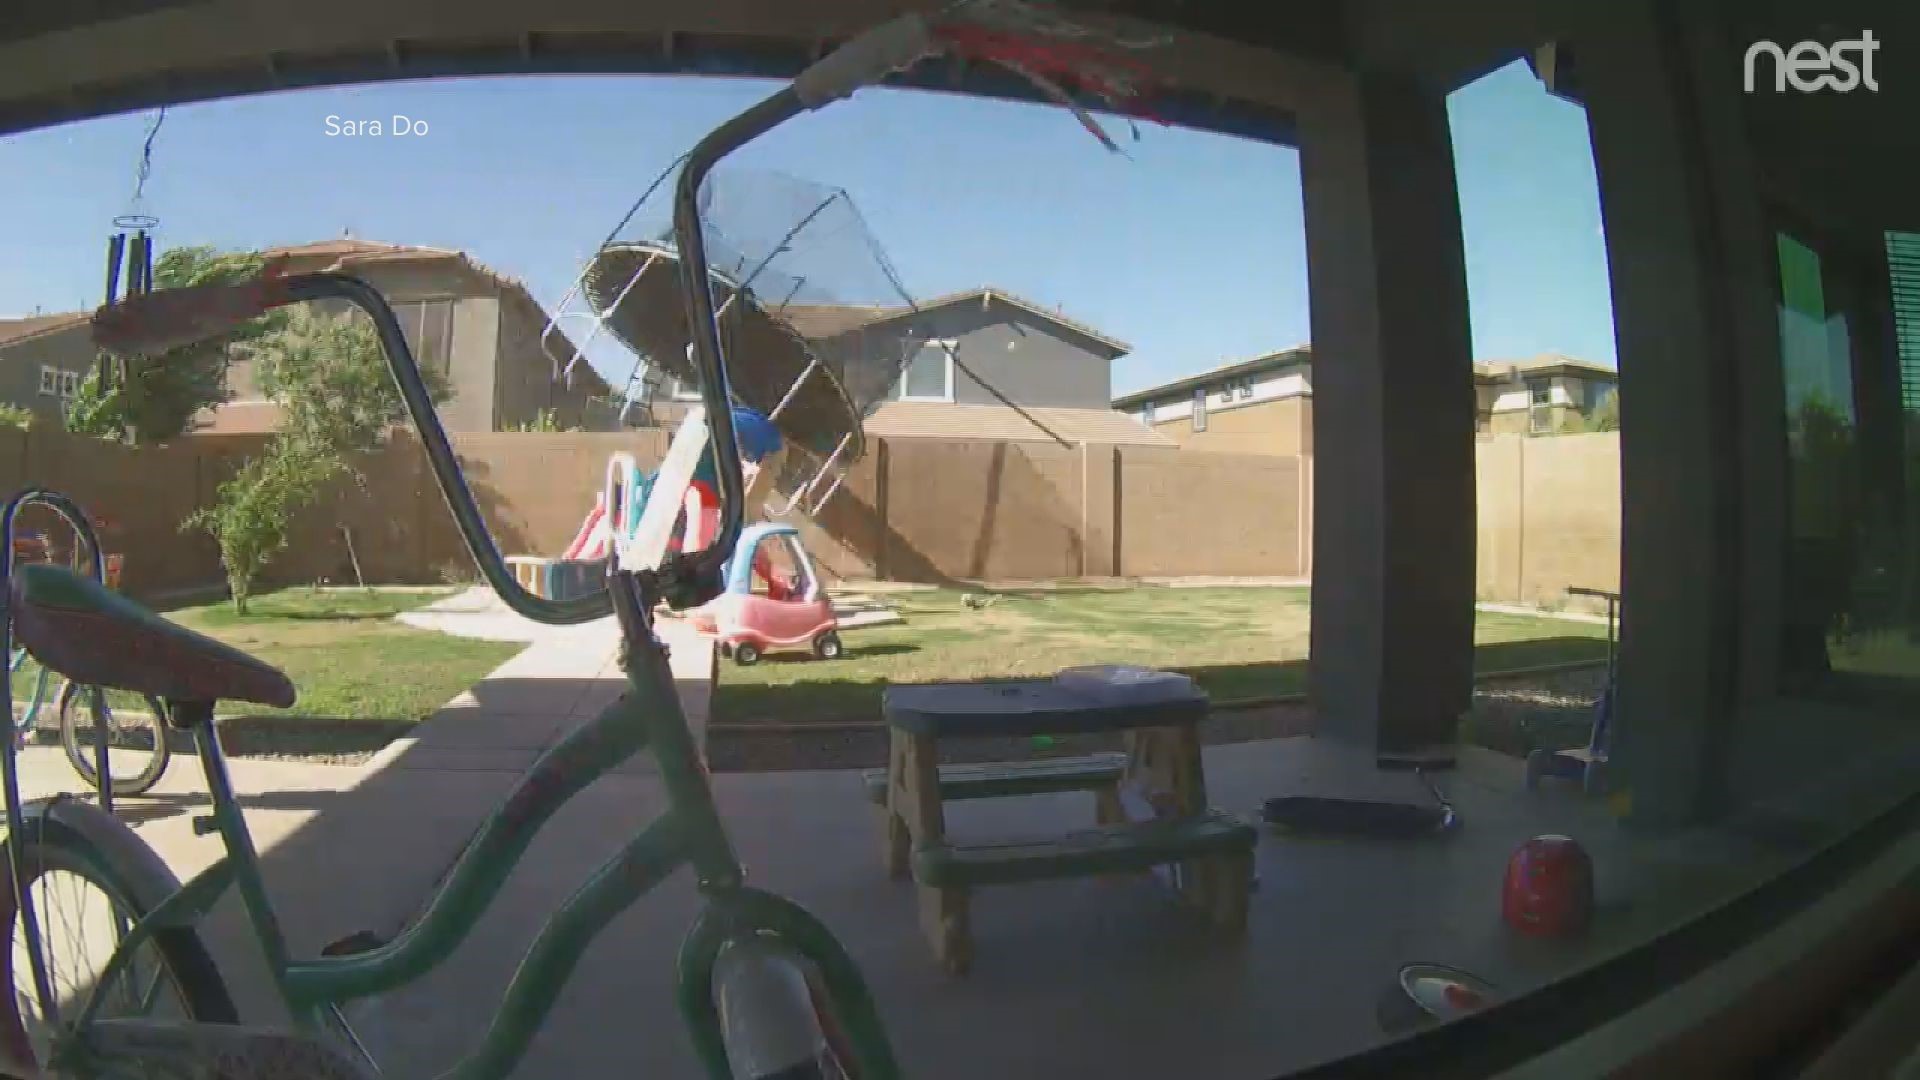 High winds in Gilbert, AZ Wednesday caused a trampoline to take flight. The flying trampoline hit Sara Do's kid's play structure and two parts of a wall, breaking both, before ending up in a neighbor's pool. Check out the moment the trampoline takes flight!